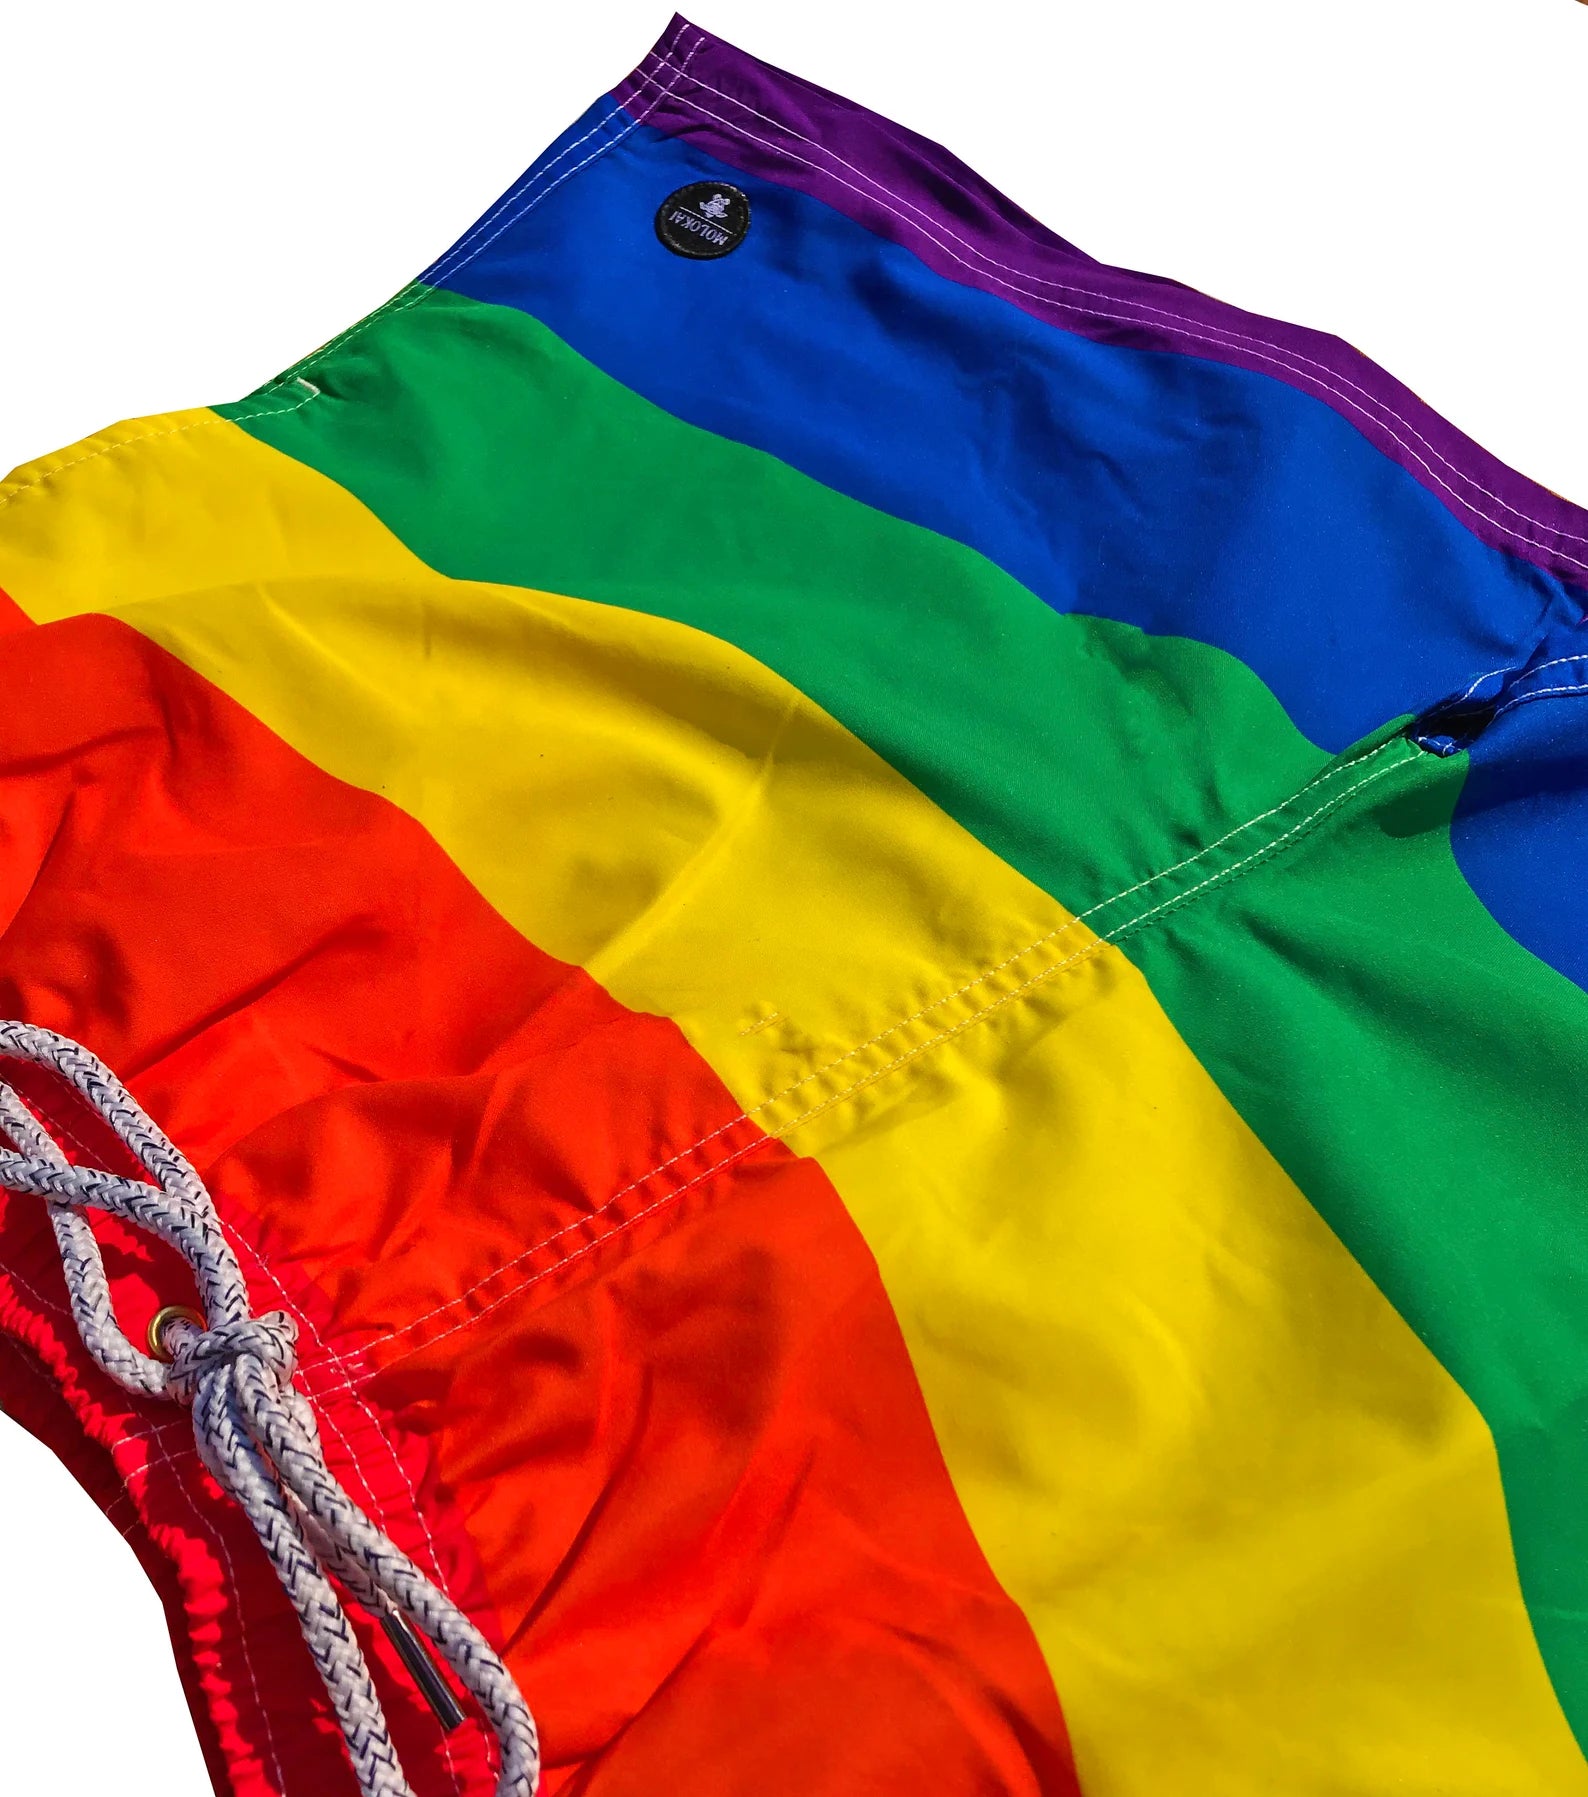 Pride Swim Trunks - 59.00 with free shipping on Gays+ Store 